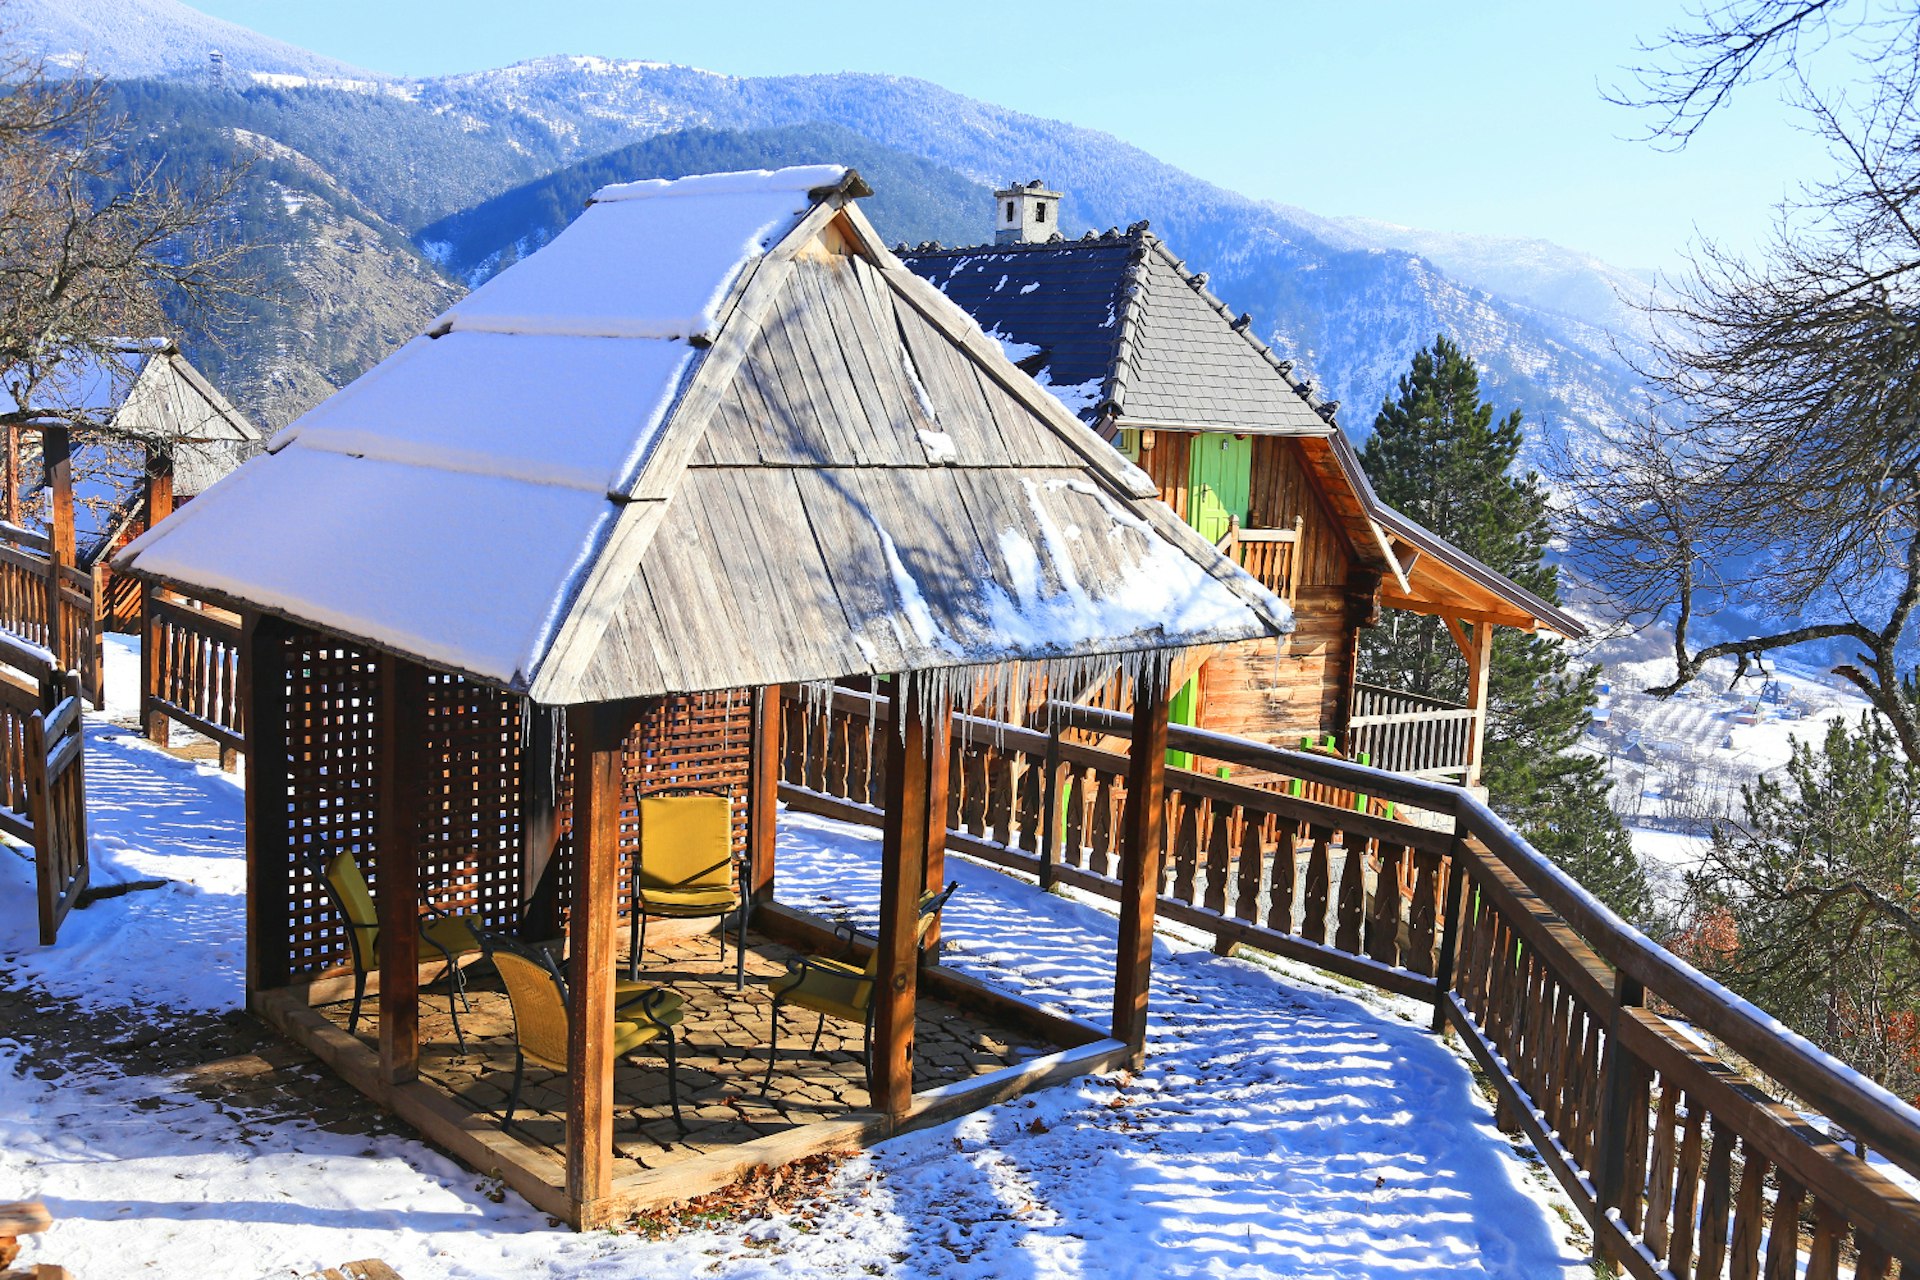 An open-sided wooden hut sits on a snowy hillside. A larger wooden chalet is in the background